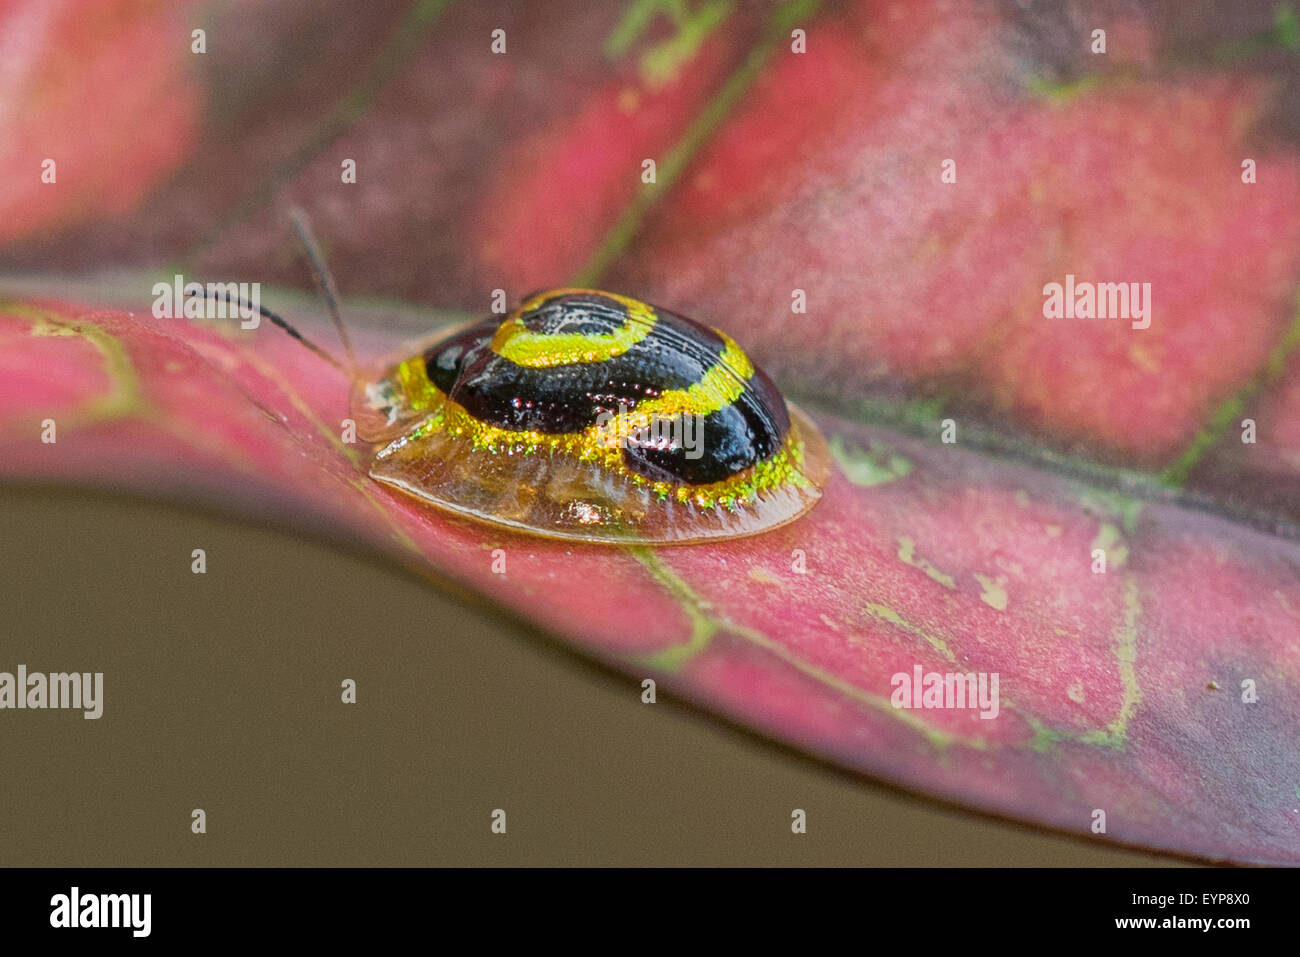 A Golden Tortoise beetle on a plant Stock Photo